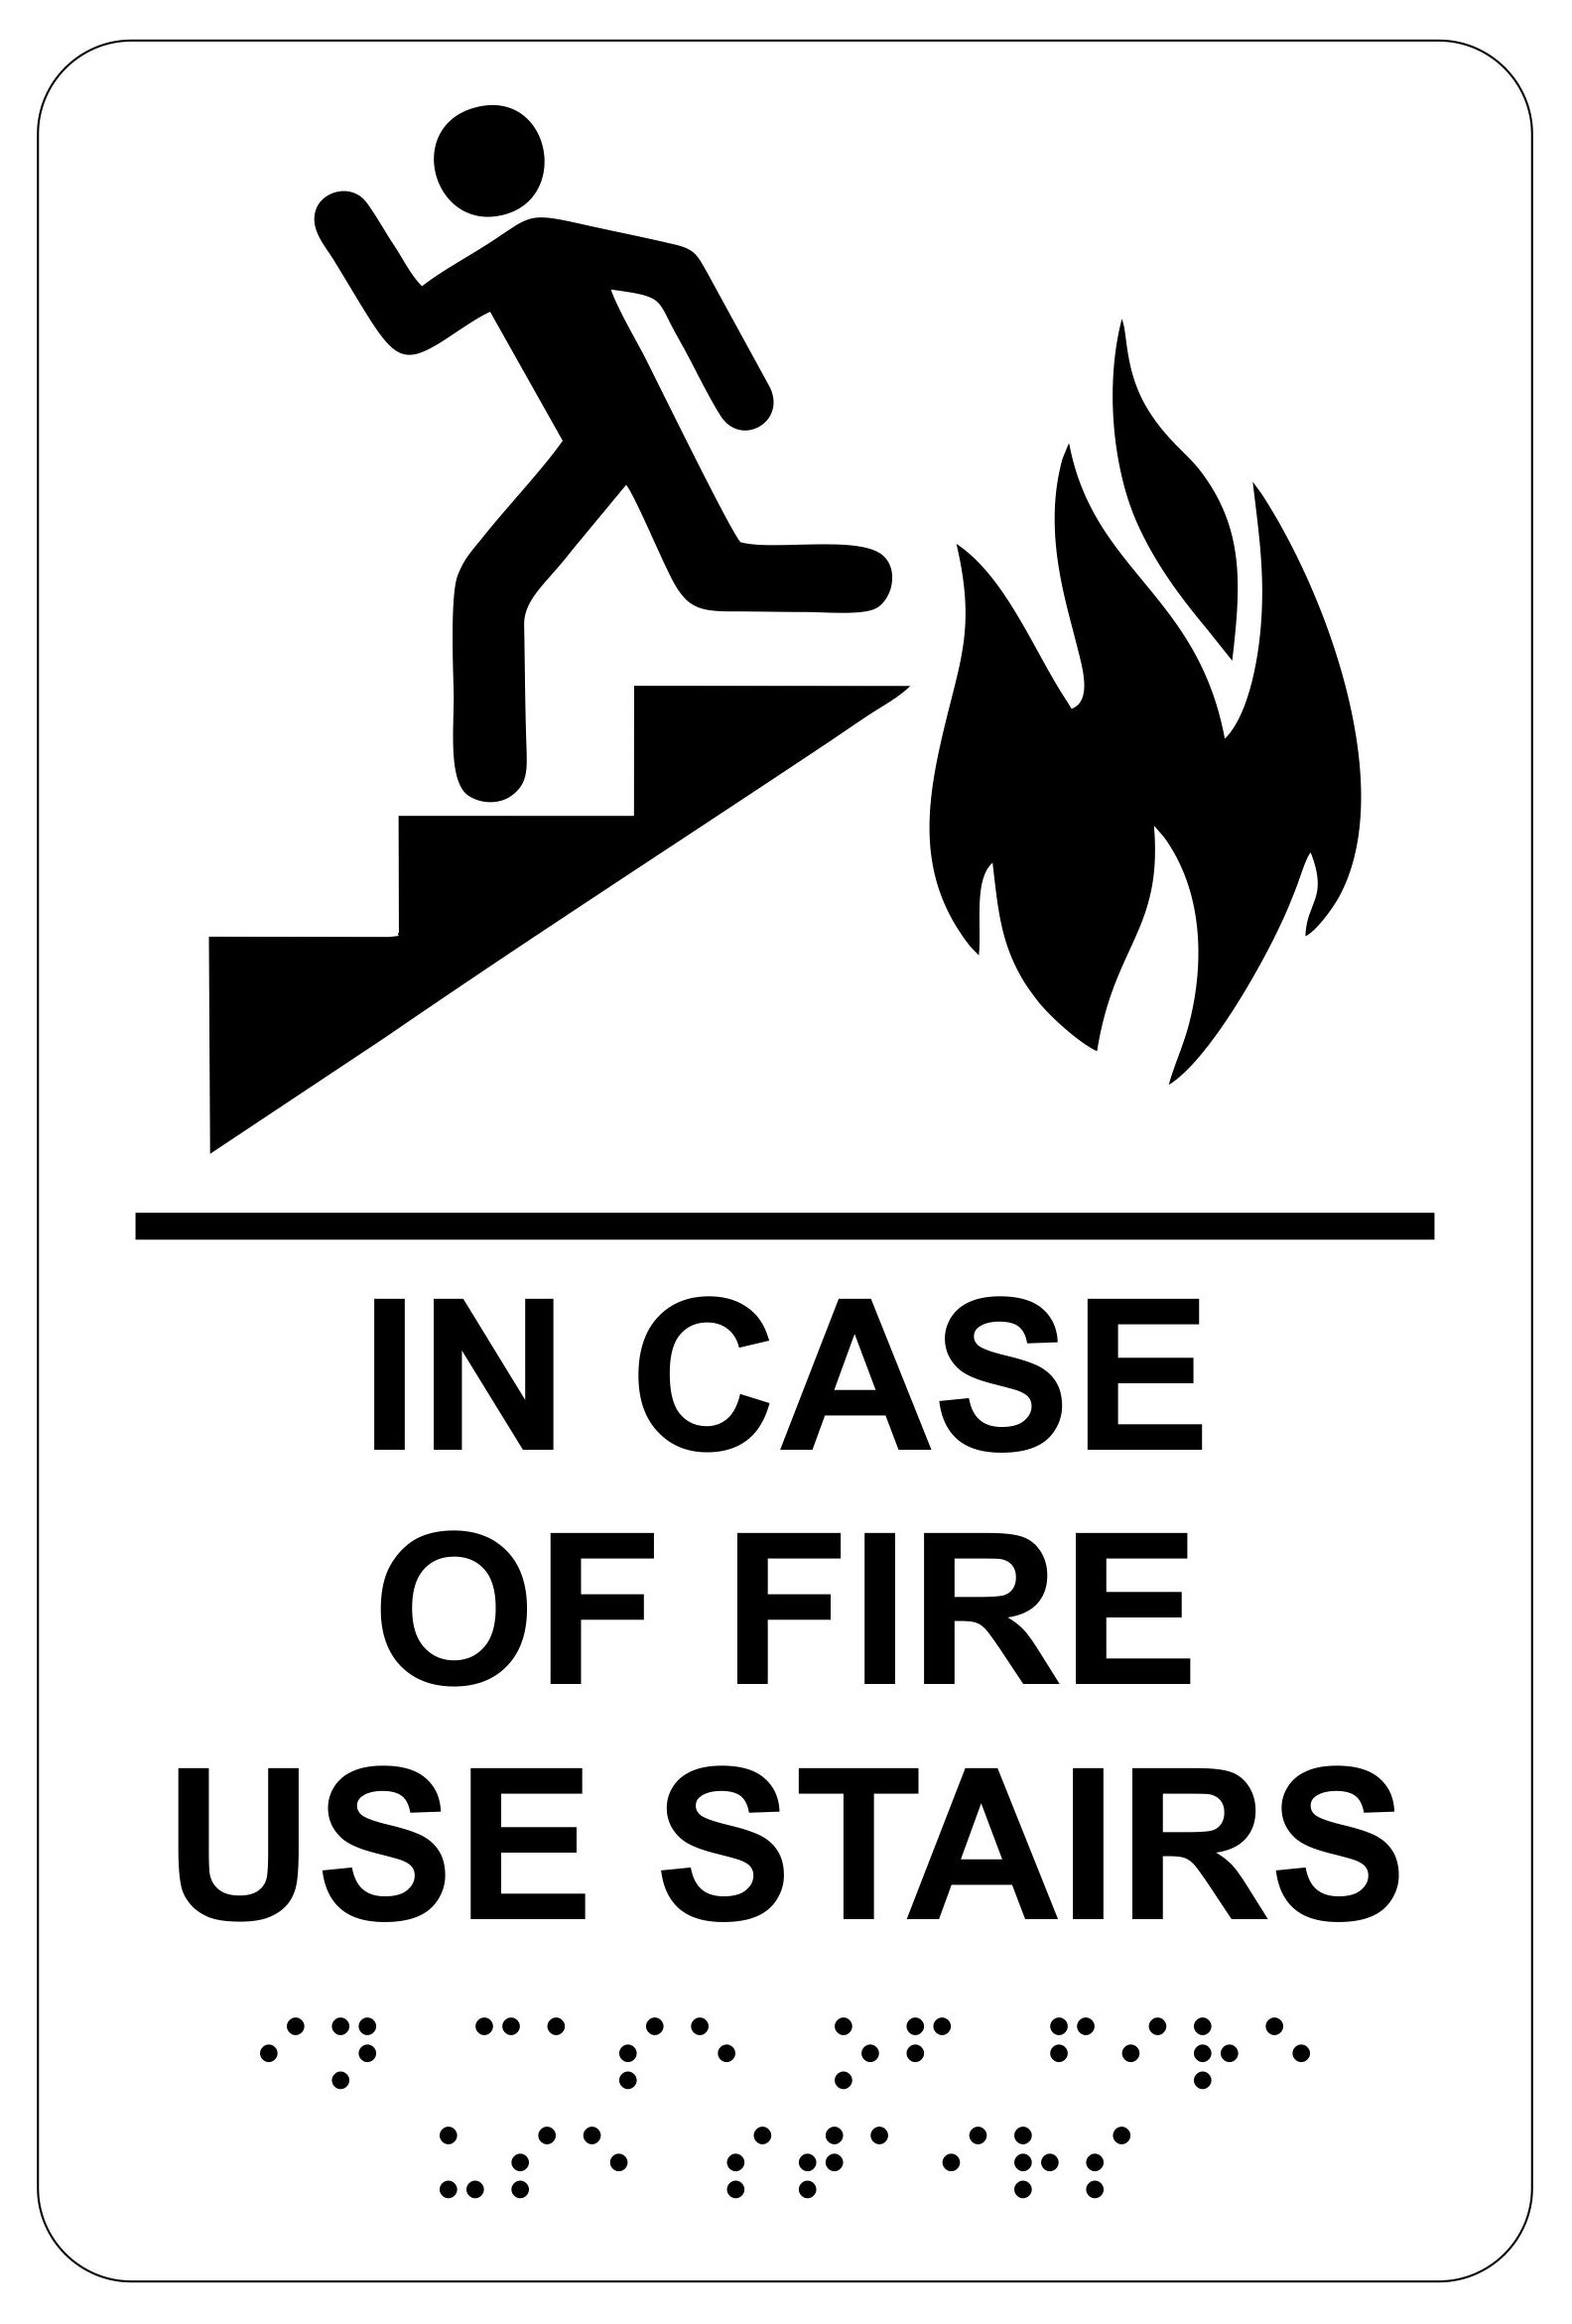 Black and white sign showing a stick figure person running down a flight hof stairs with flames behind them. The text reads 'IN CASE OF FIRE USE STAIRS', which is repeated in braile below.